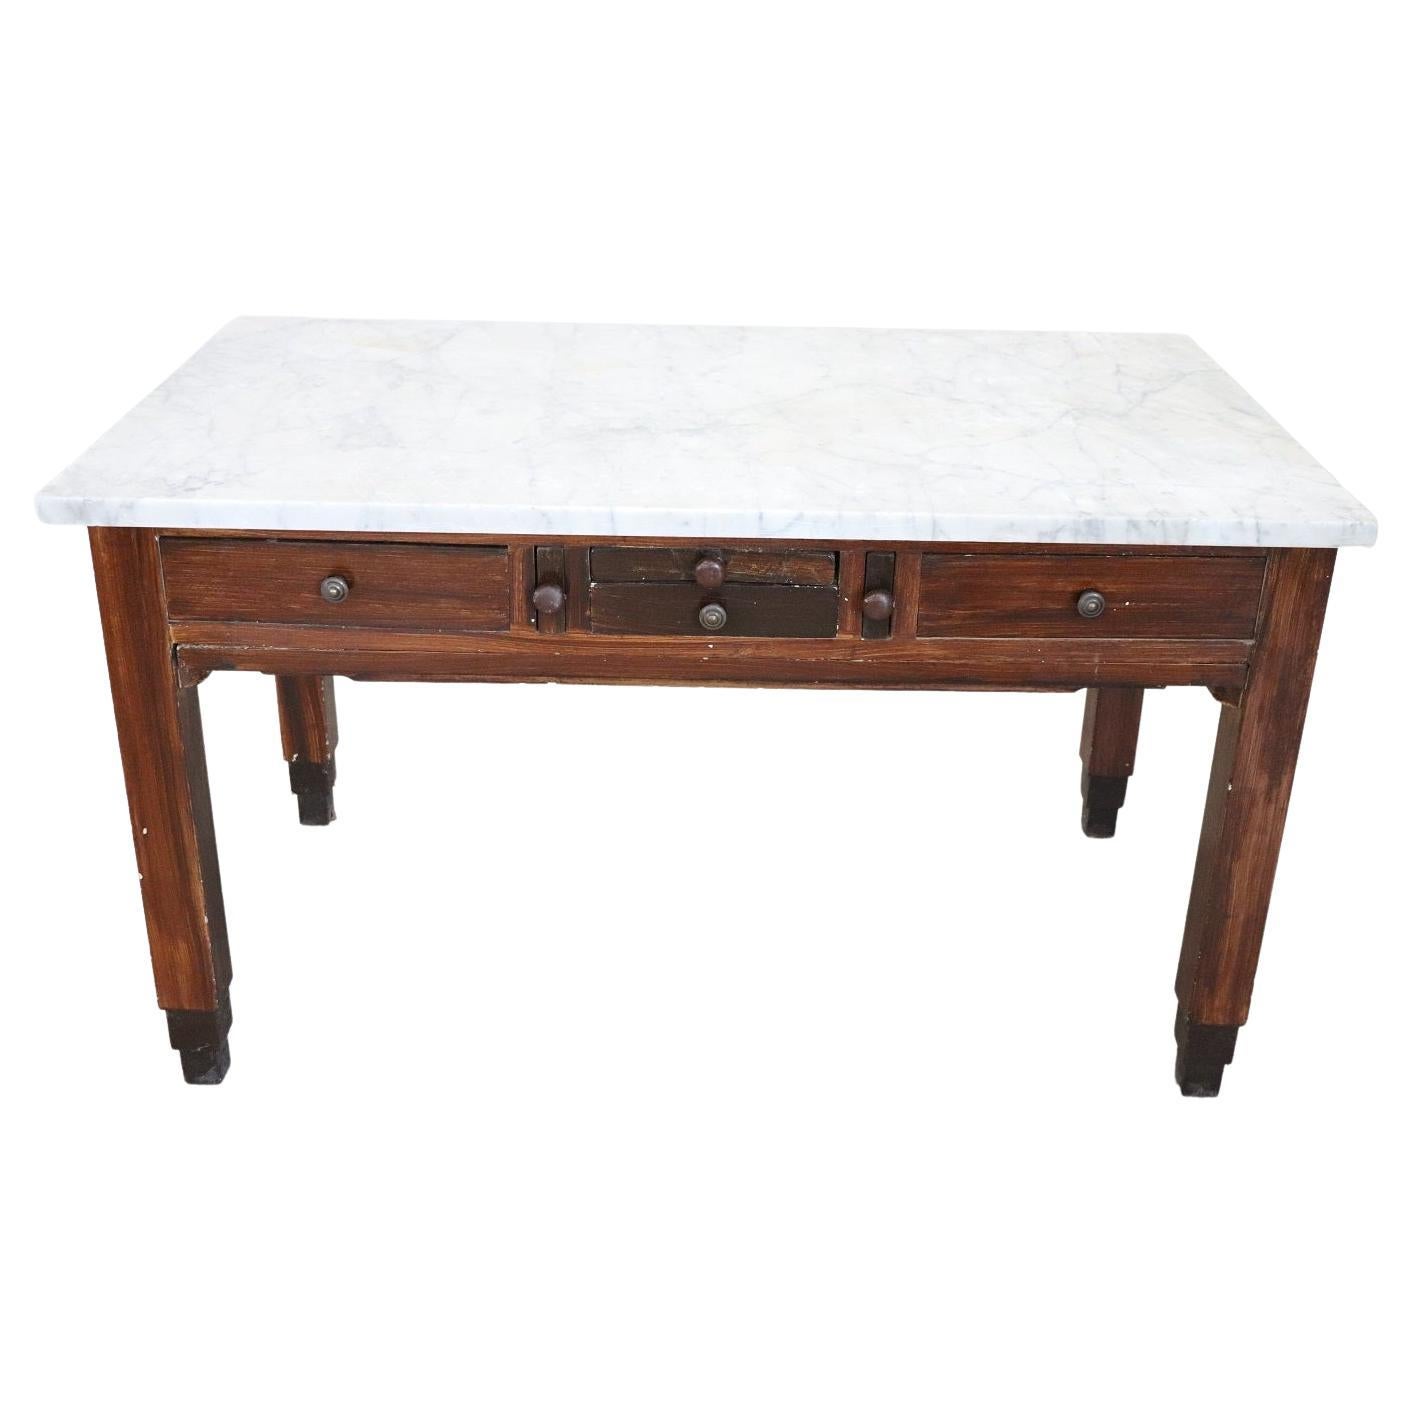 Early 20th Century Italian Kitchen Pasta Table with Marble Top and Accessories